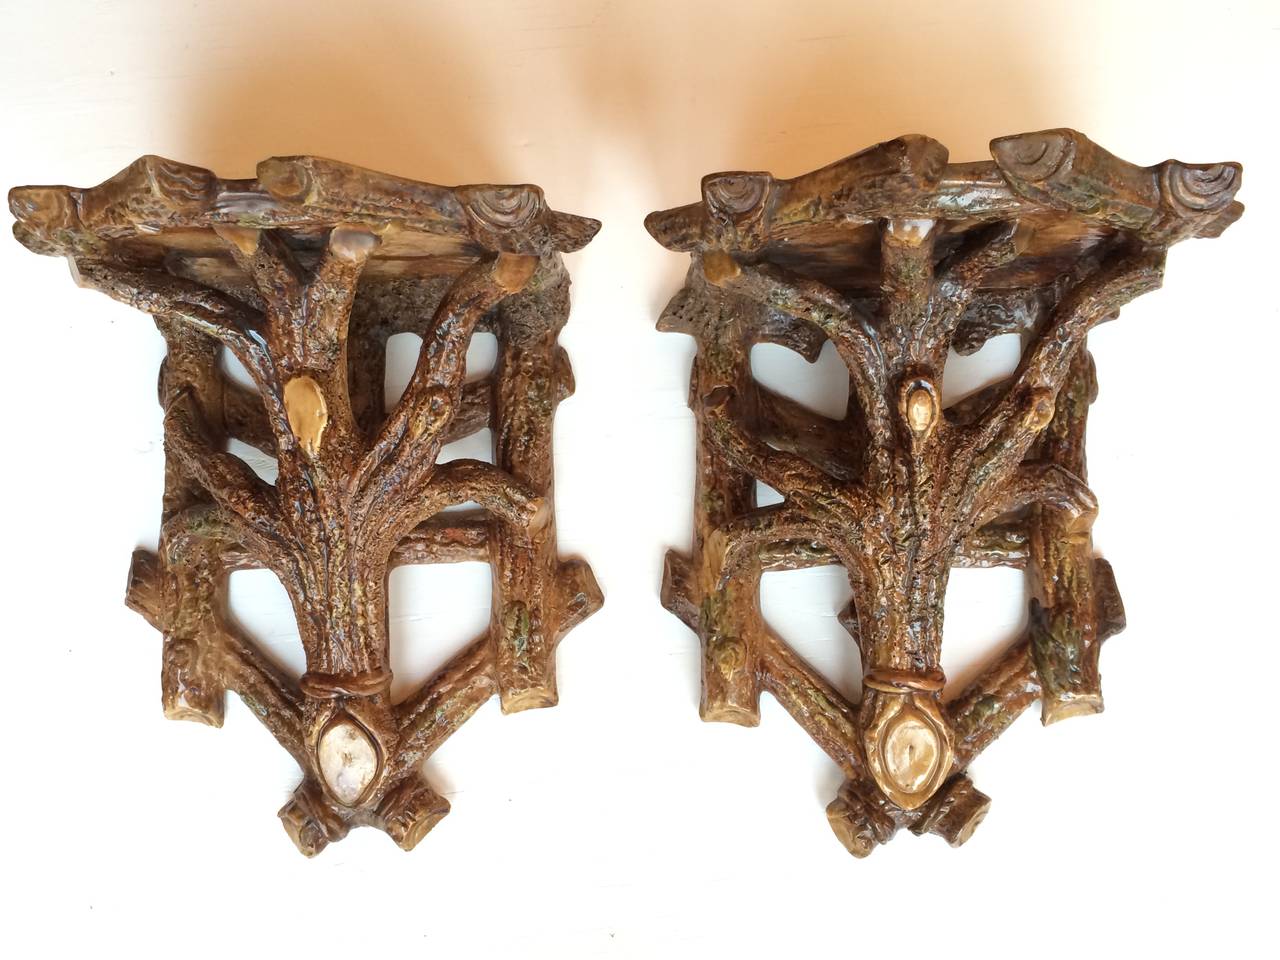 Pair of glazed ceramic branch form (faux bois) wall shelves in the balmoral/ majolica style, circa 1880.  The scale of these wall shelves is unusual as they are particularly large.

Provenance: Ex collection of Leo Lerman & Gray Foy.